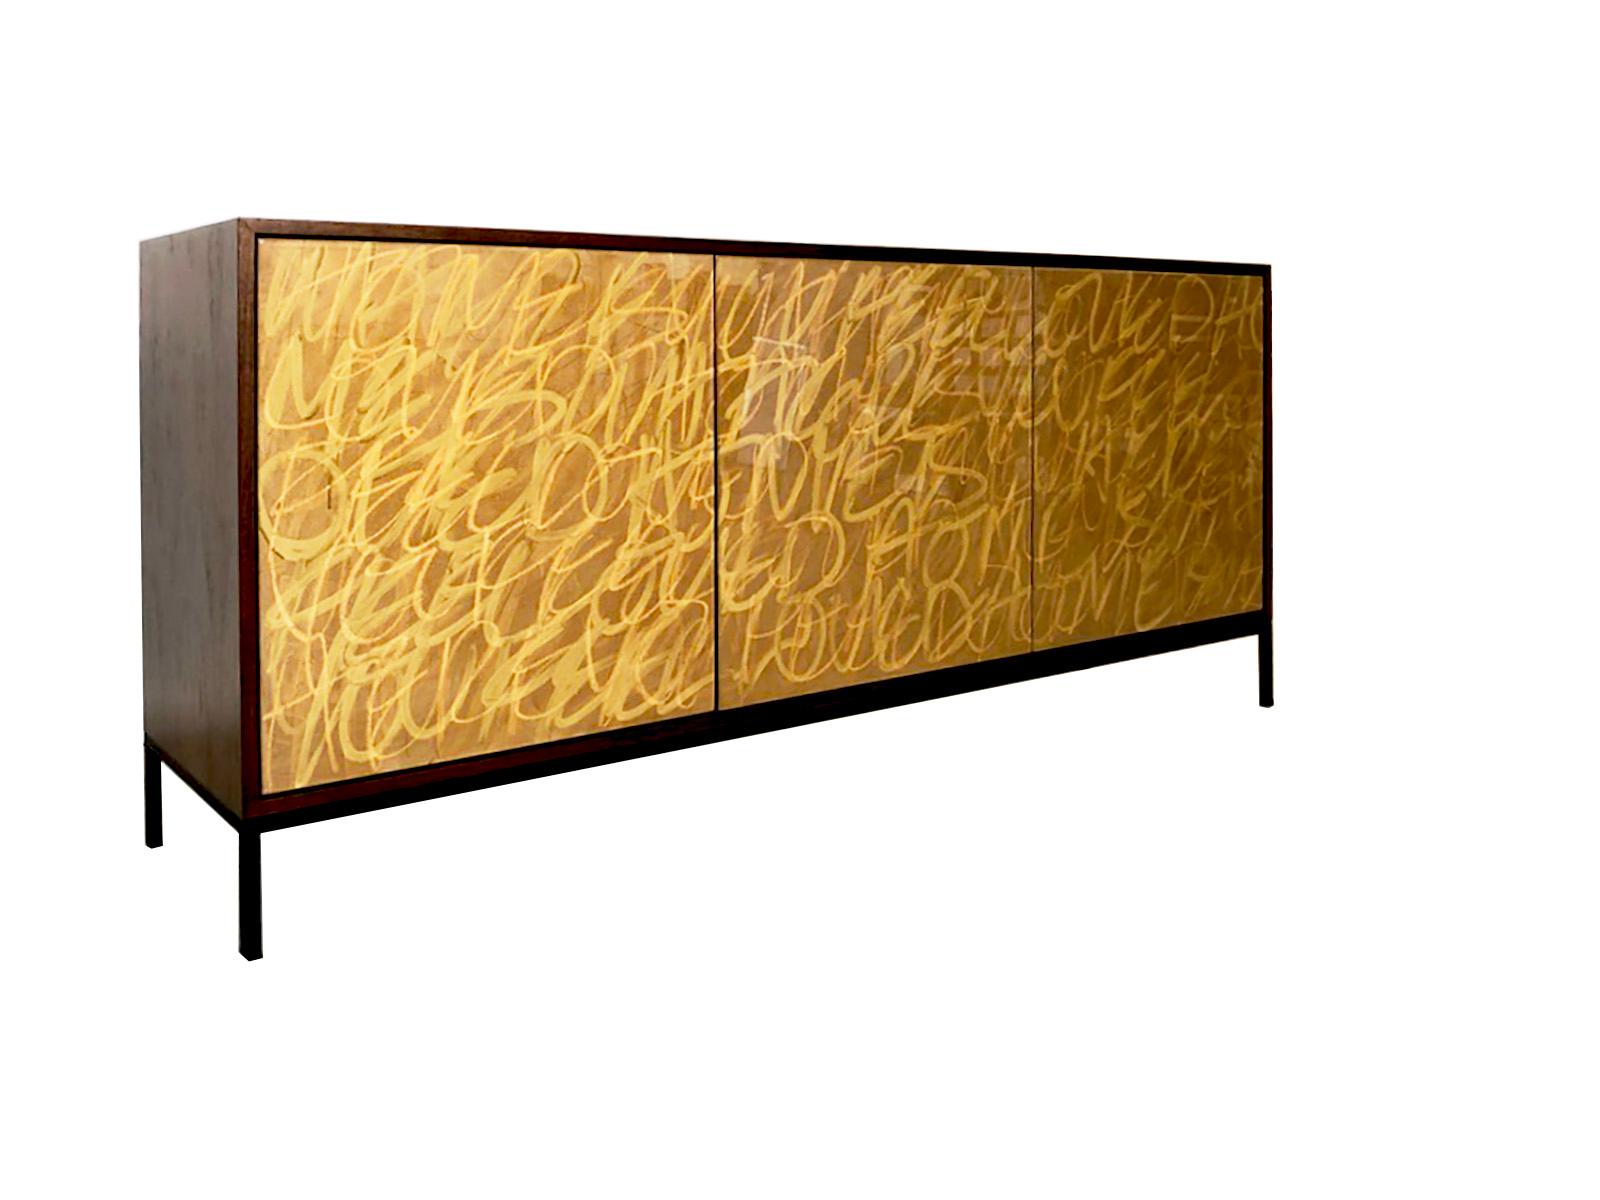 Our gold Graffiti cabinet is designed and finished in our Toronto Studio, Morgan Clayhall.
The cabinet doors have original art work by artist Murray Duncan. The client can supply words/poems/names/birthdays, etc that can be incorporated into the